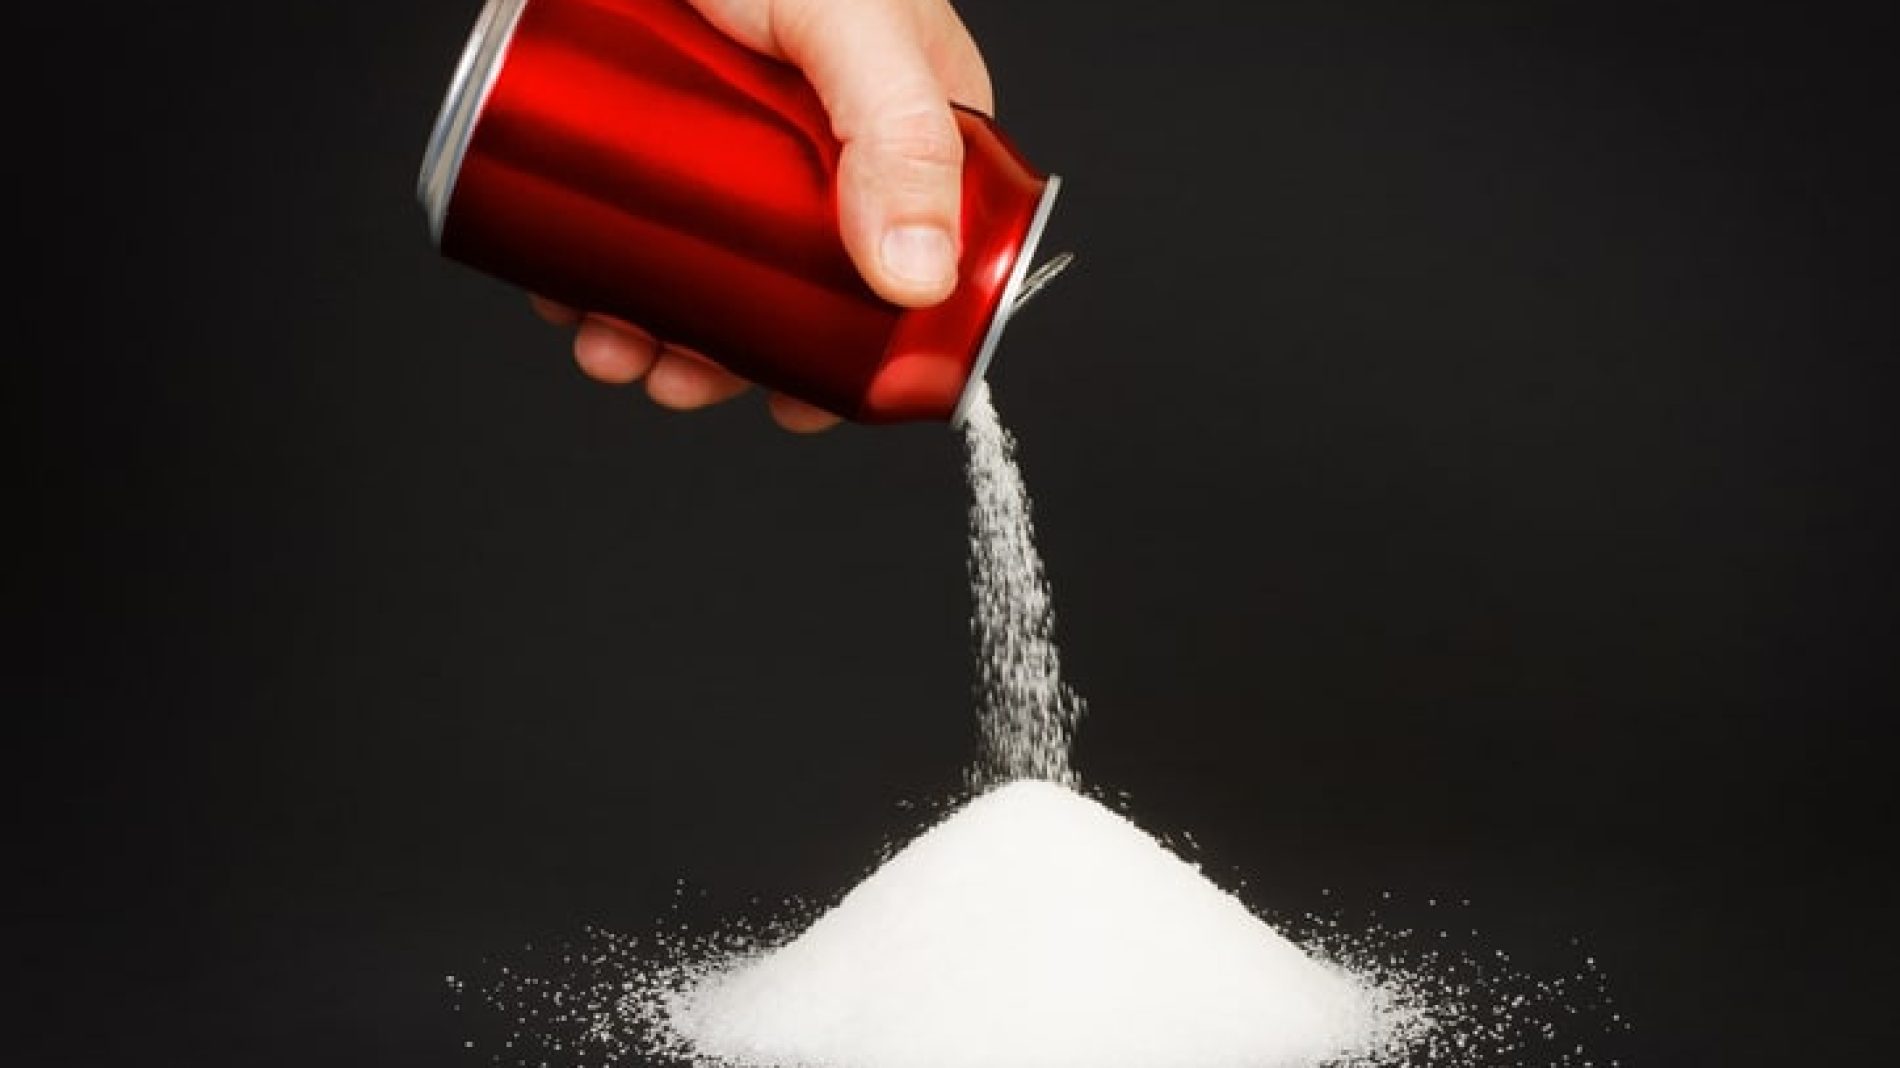 can pouring out sugar